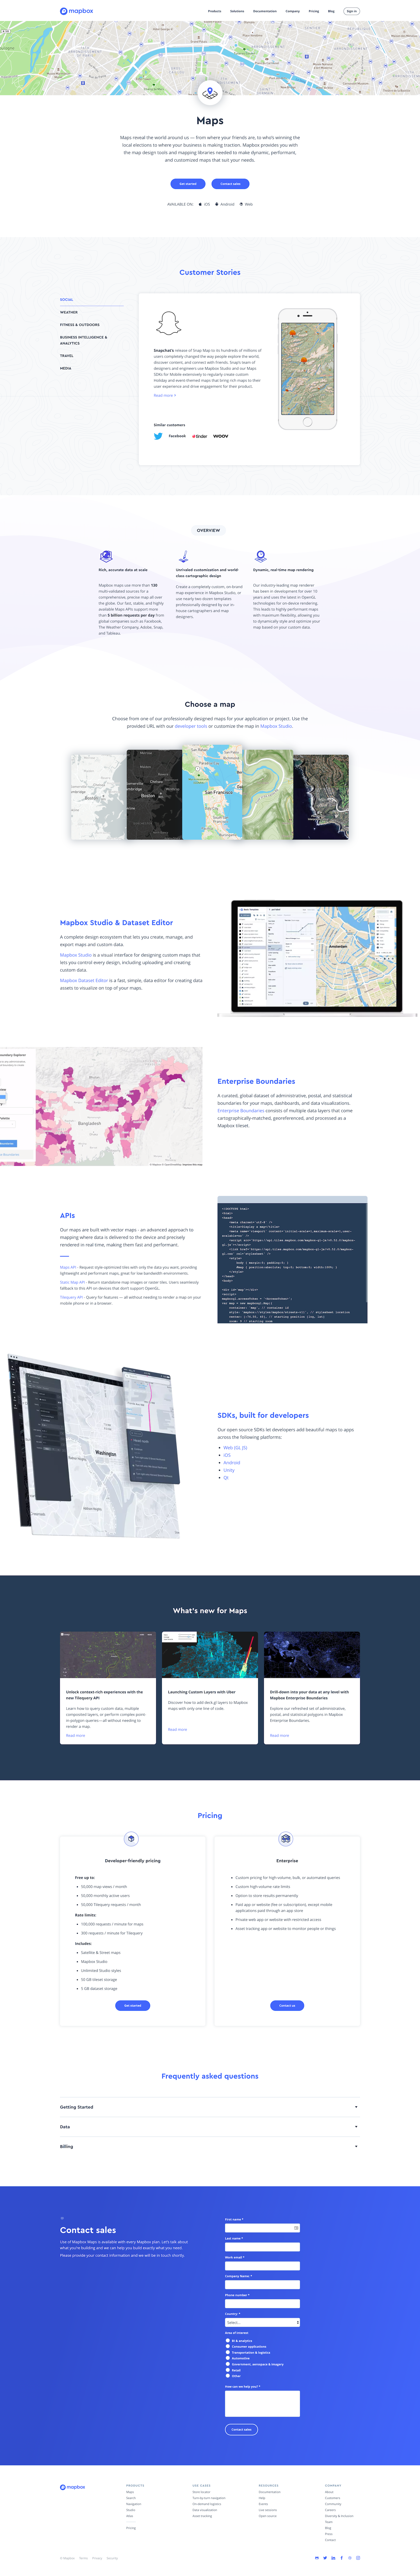 Screenshot of the Maps page from the Mapbox website.